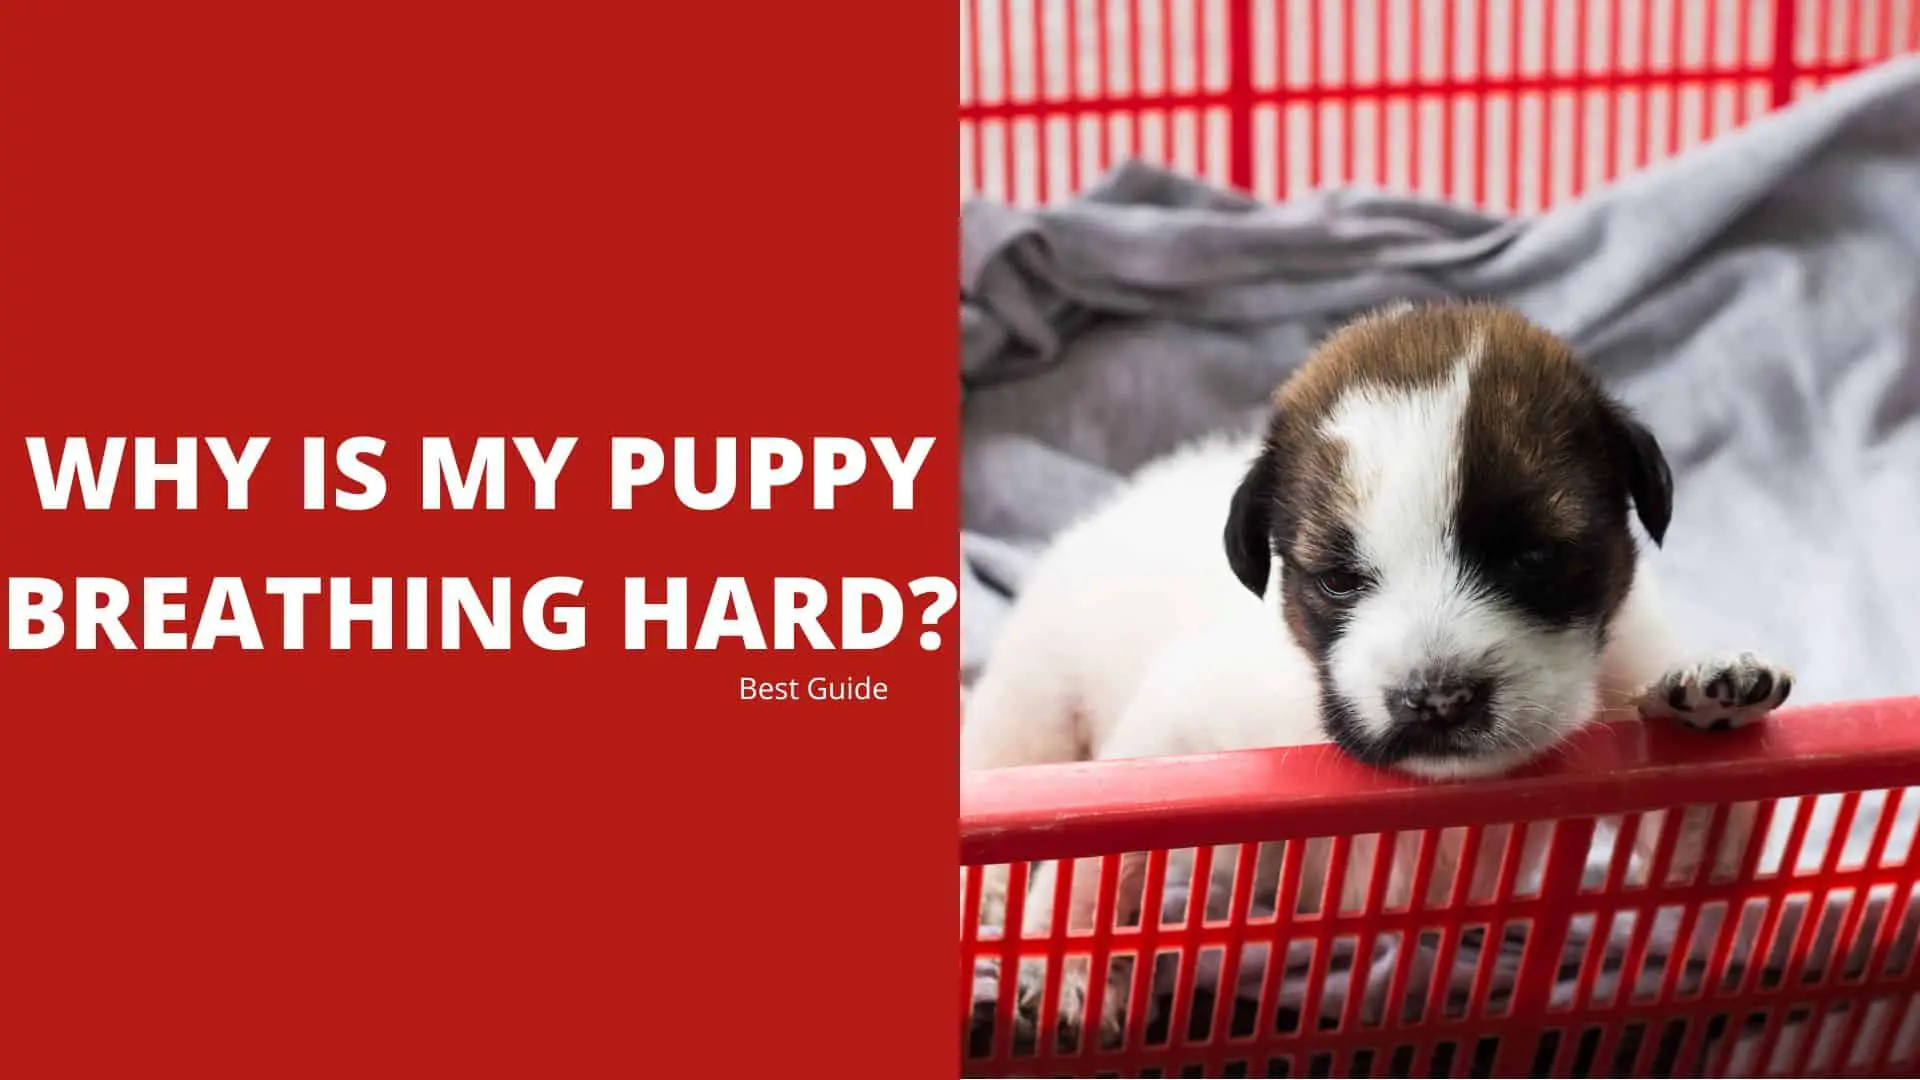 Why Is My Puppy Breathing Hard? Best Guide 2022